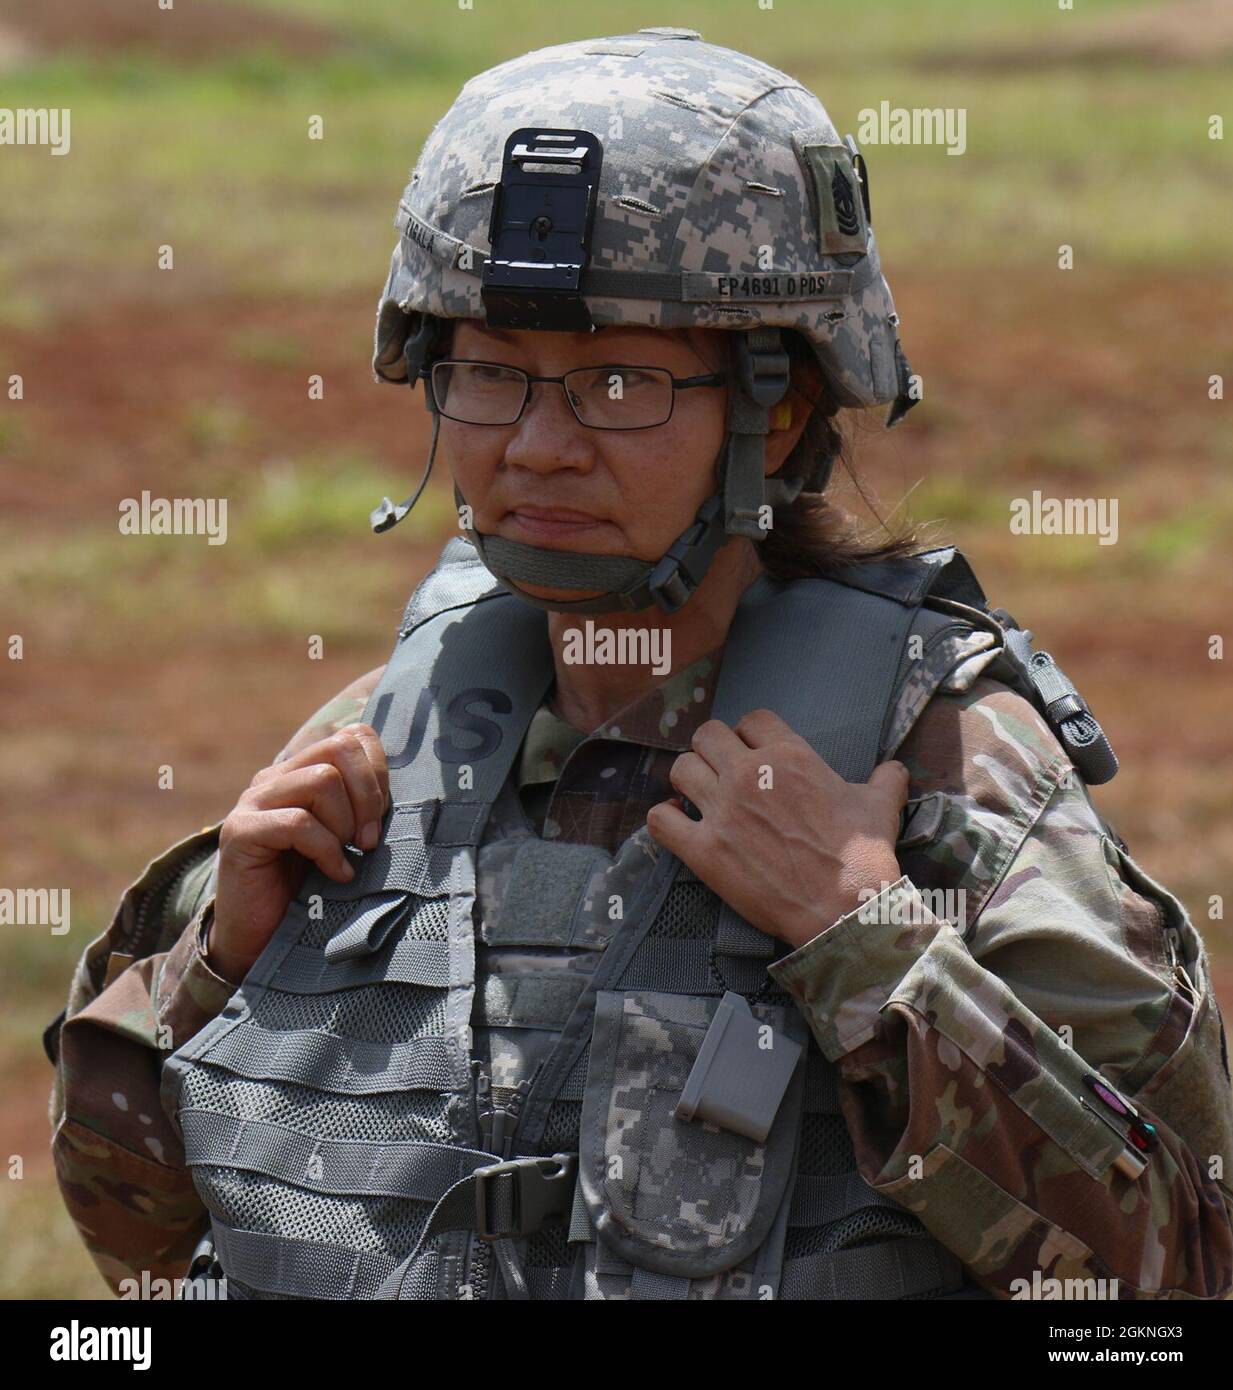 Hawaii Army National Guard Soldier, 1st Sgt. Edy J. Gallegos with the 117th Mobile Public Affairs Detachment prepares for range operations, Schofield Barracks, Hawaii, June 5, 2021. Stock Photo